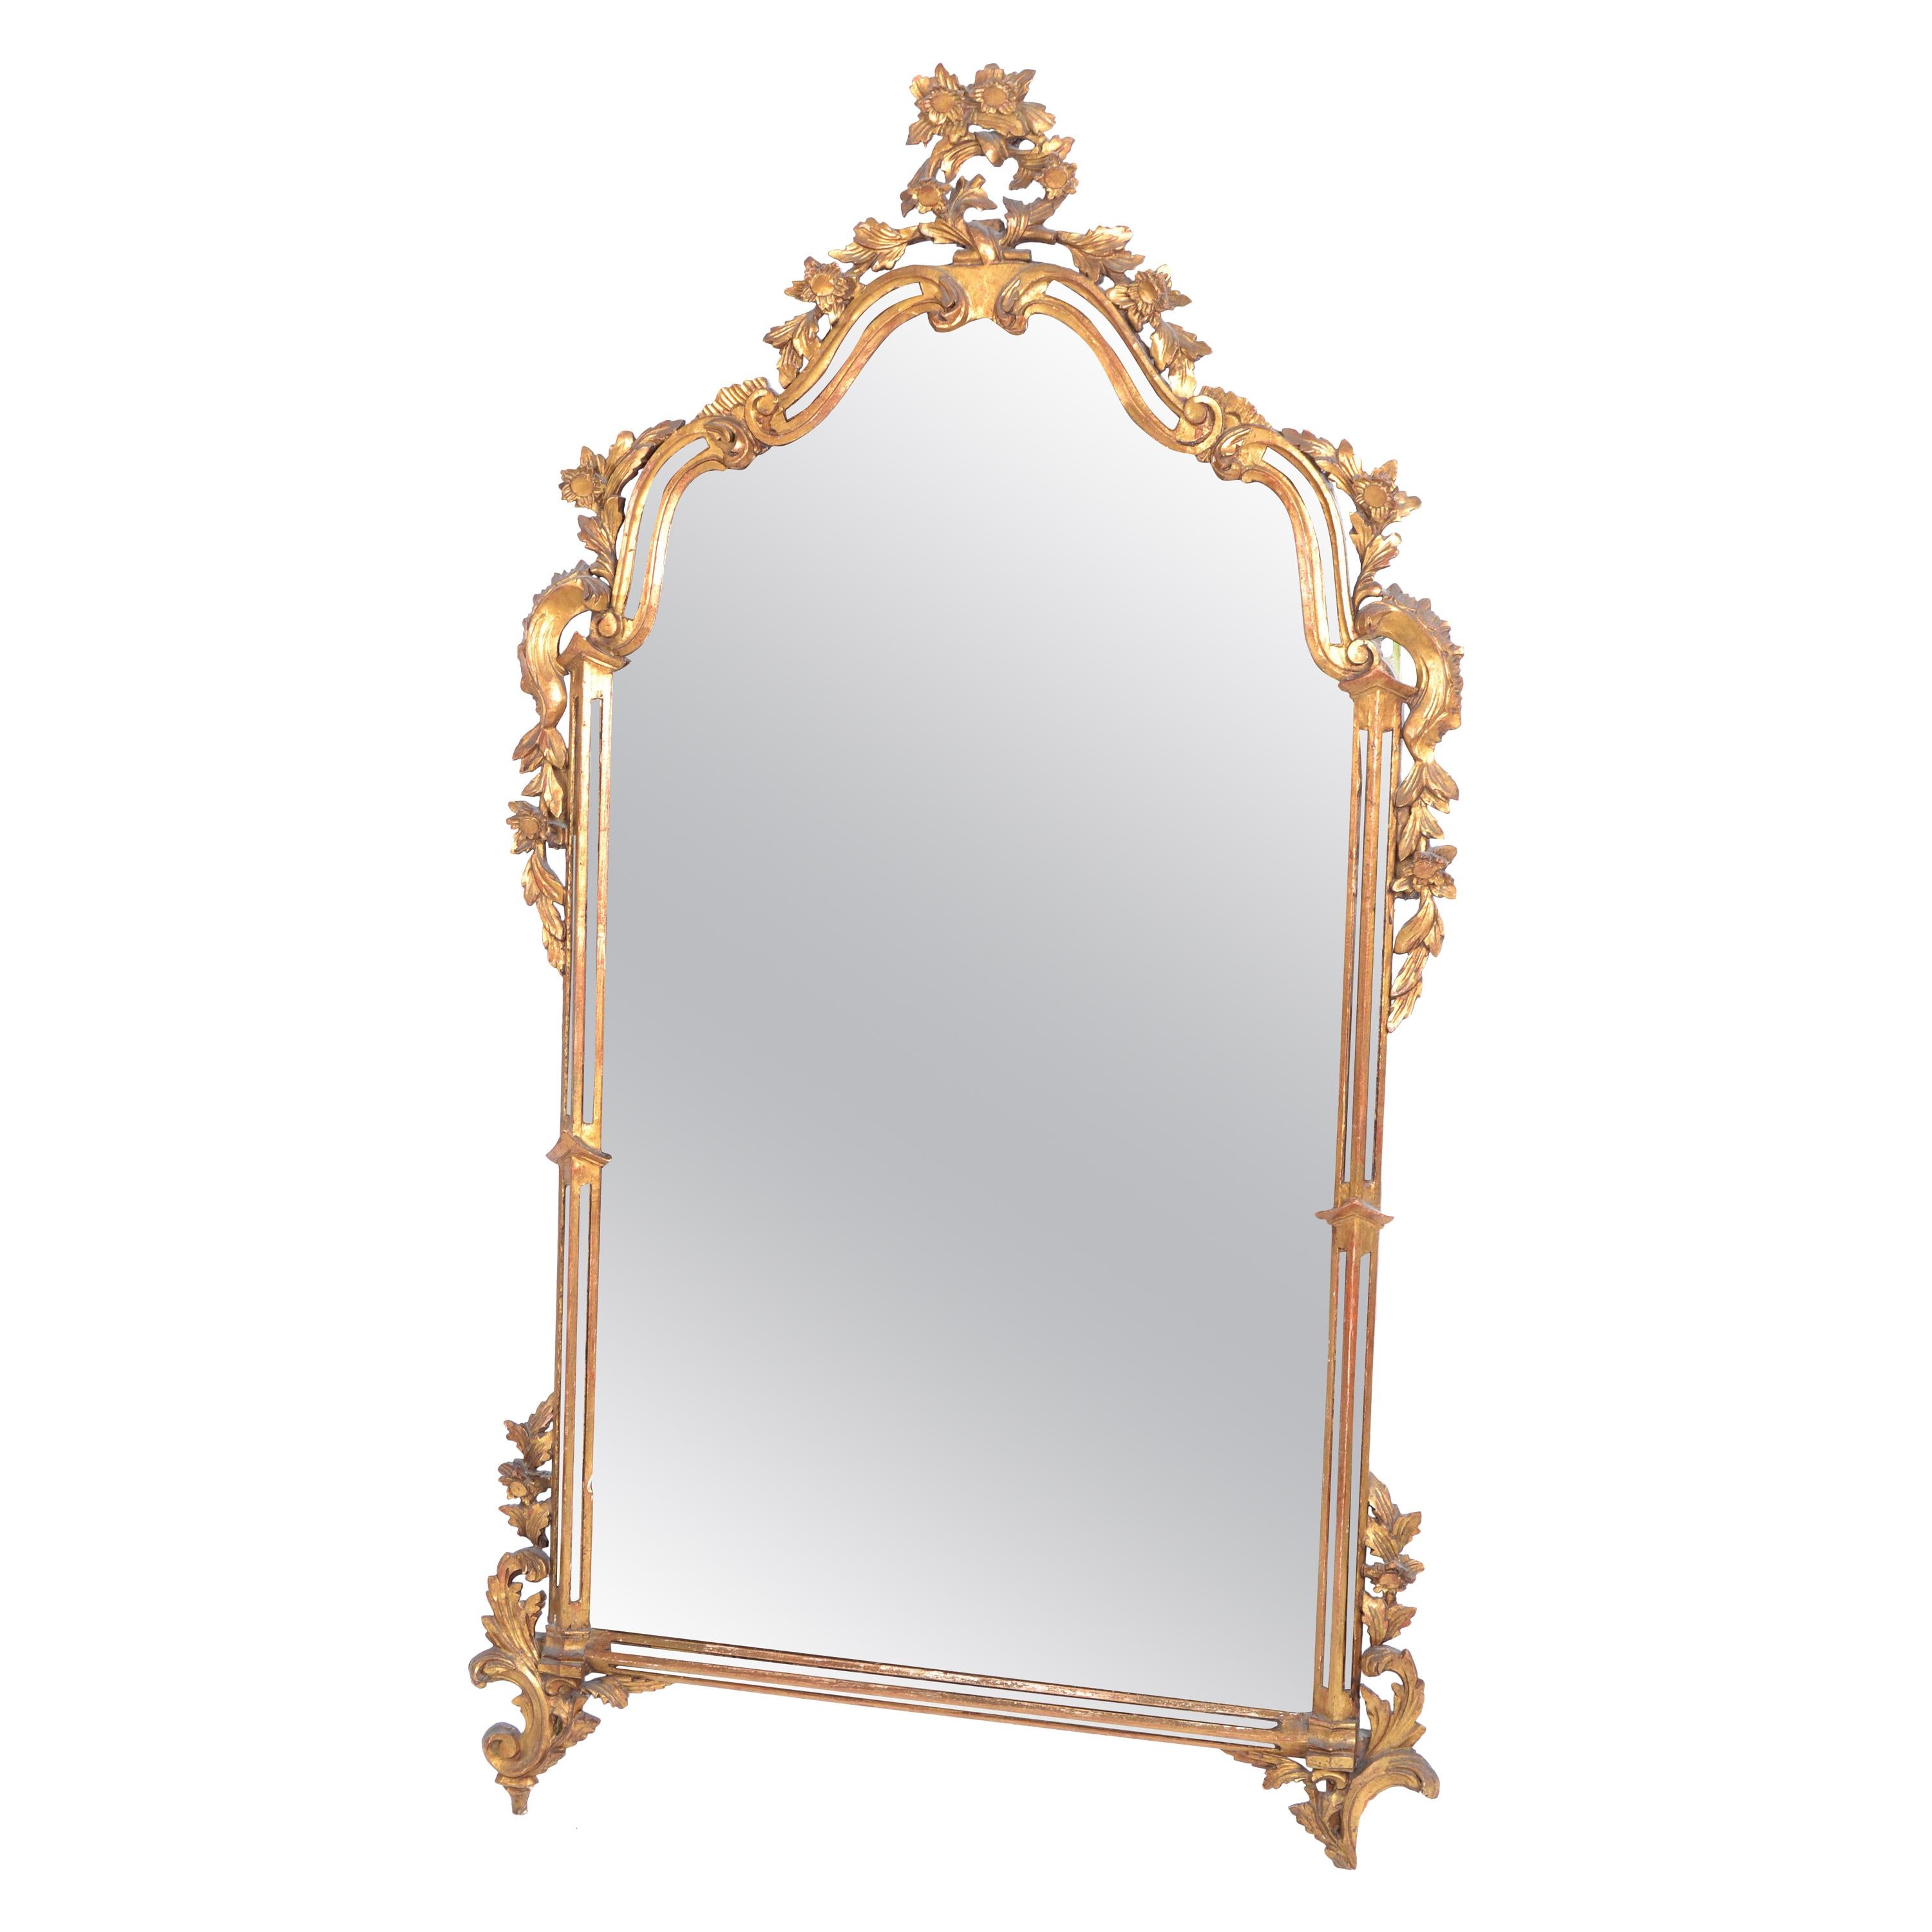 Italian Florentine Hand Carved Giltwood and Antique Mirrored Glass Wall Mirror